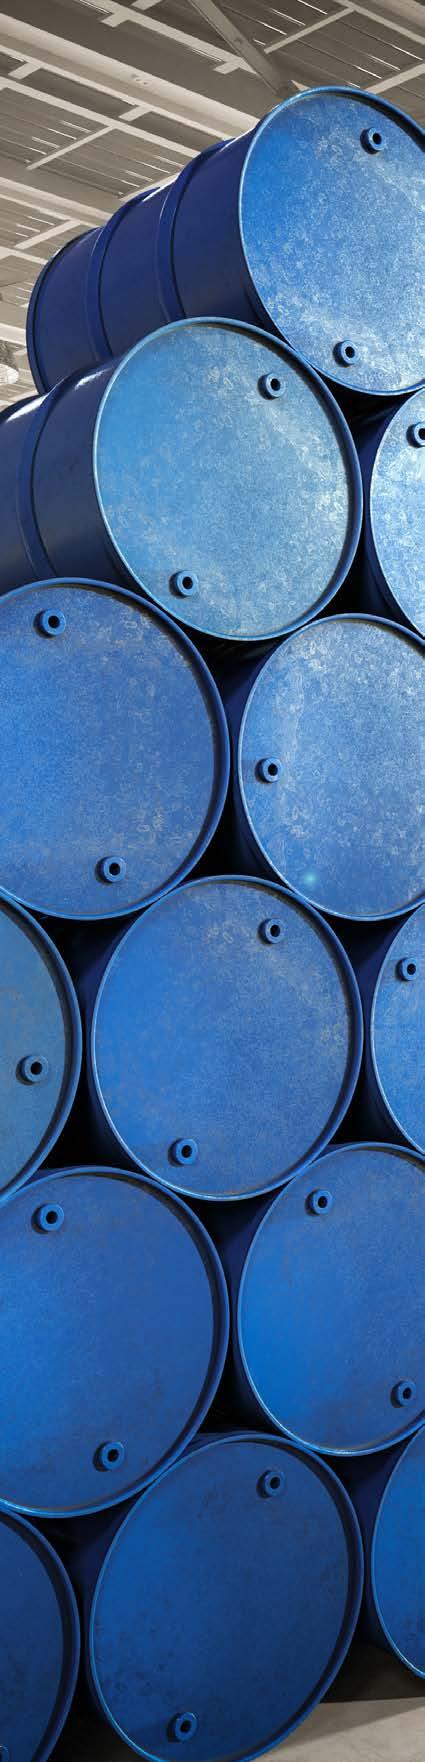 8 The forecast decline in gasoline demand provides an opportunity for the naphtha currently converted into gasoline components, to be used as petrochemical feedstock.